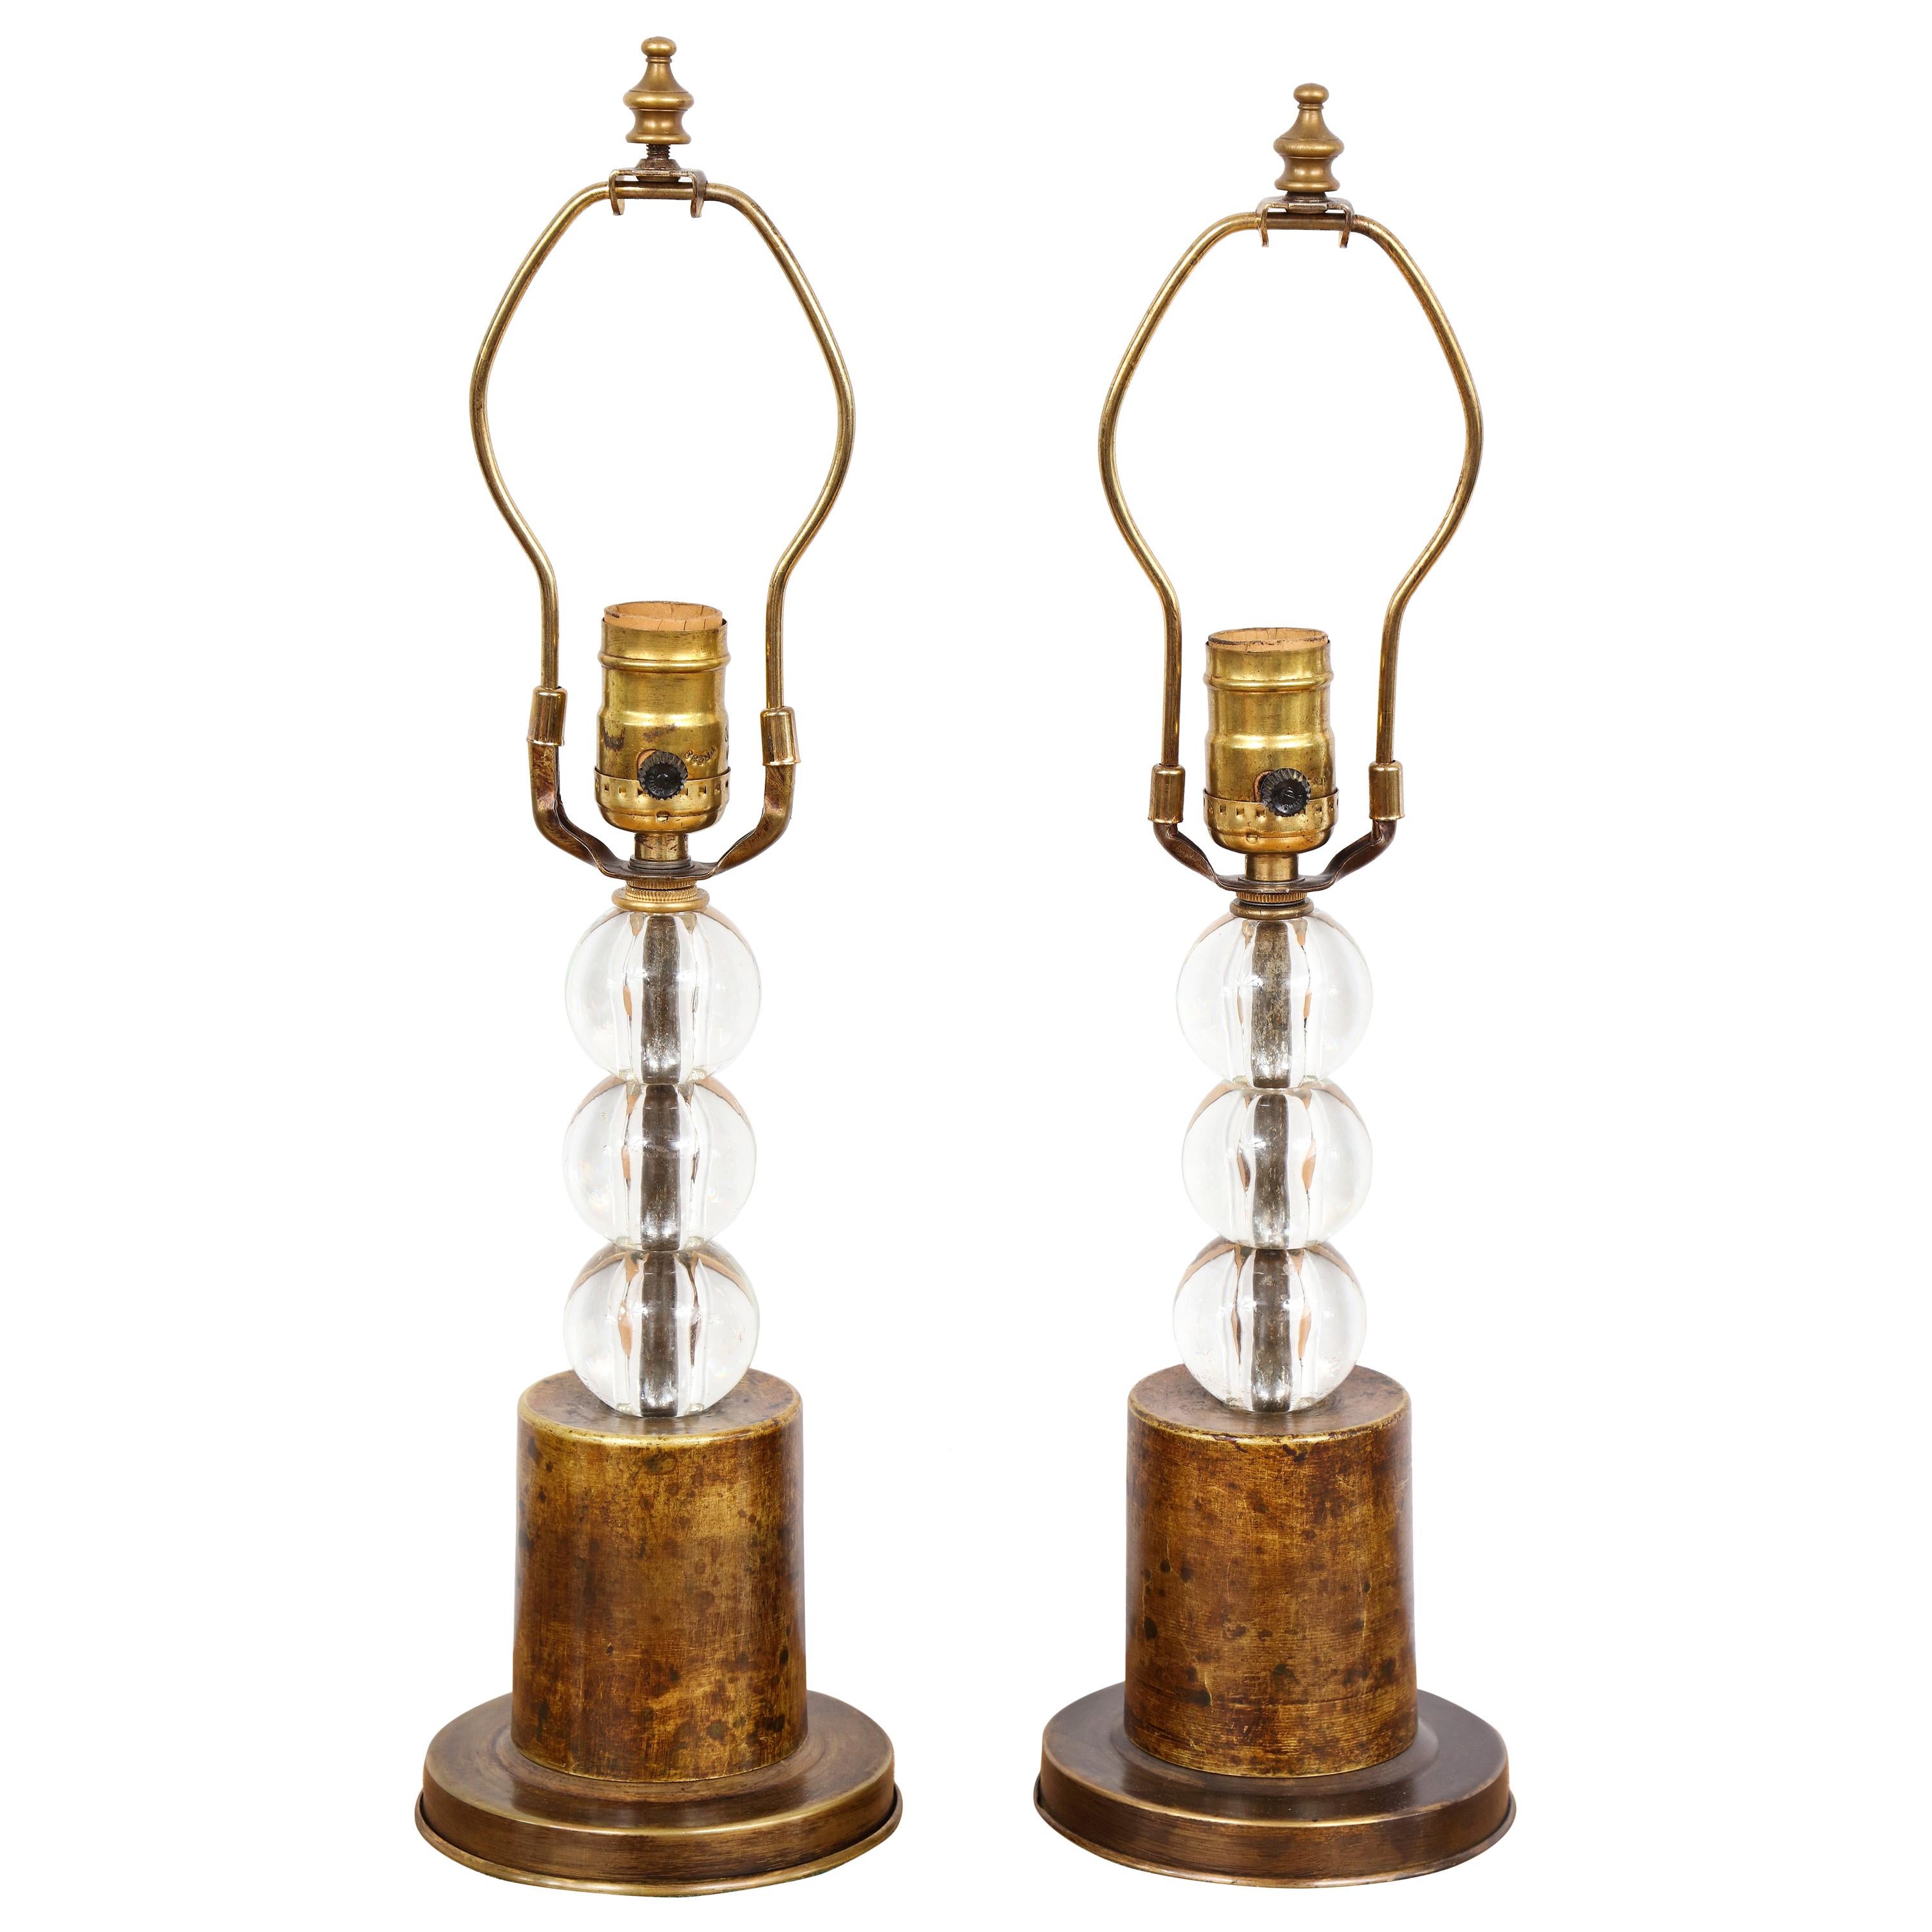 Pair of Boudoir Lamps with Crystal Orbs on Brass Base